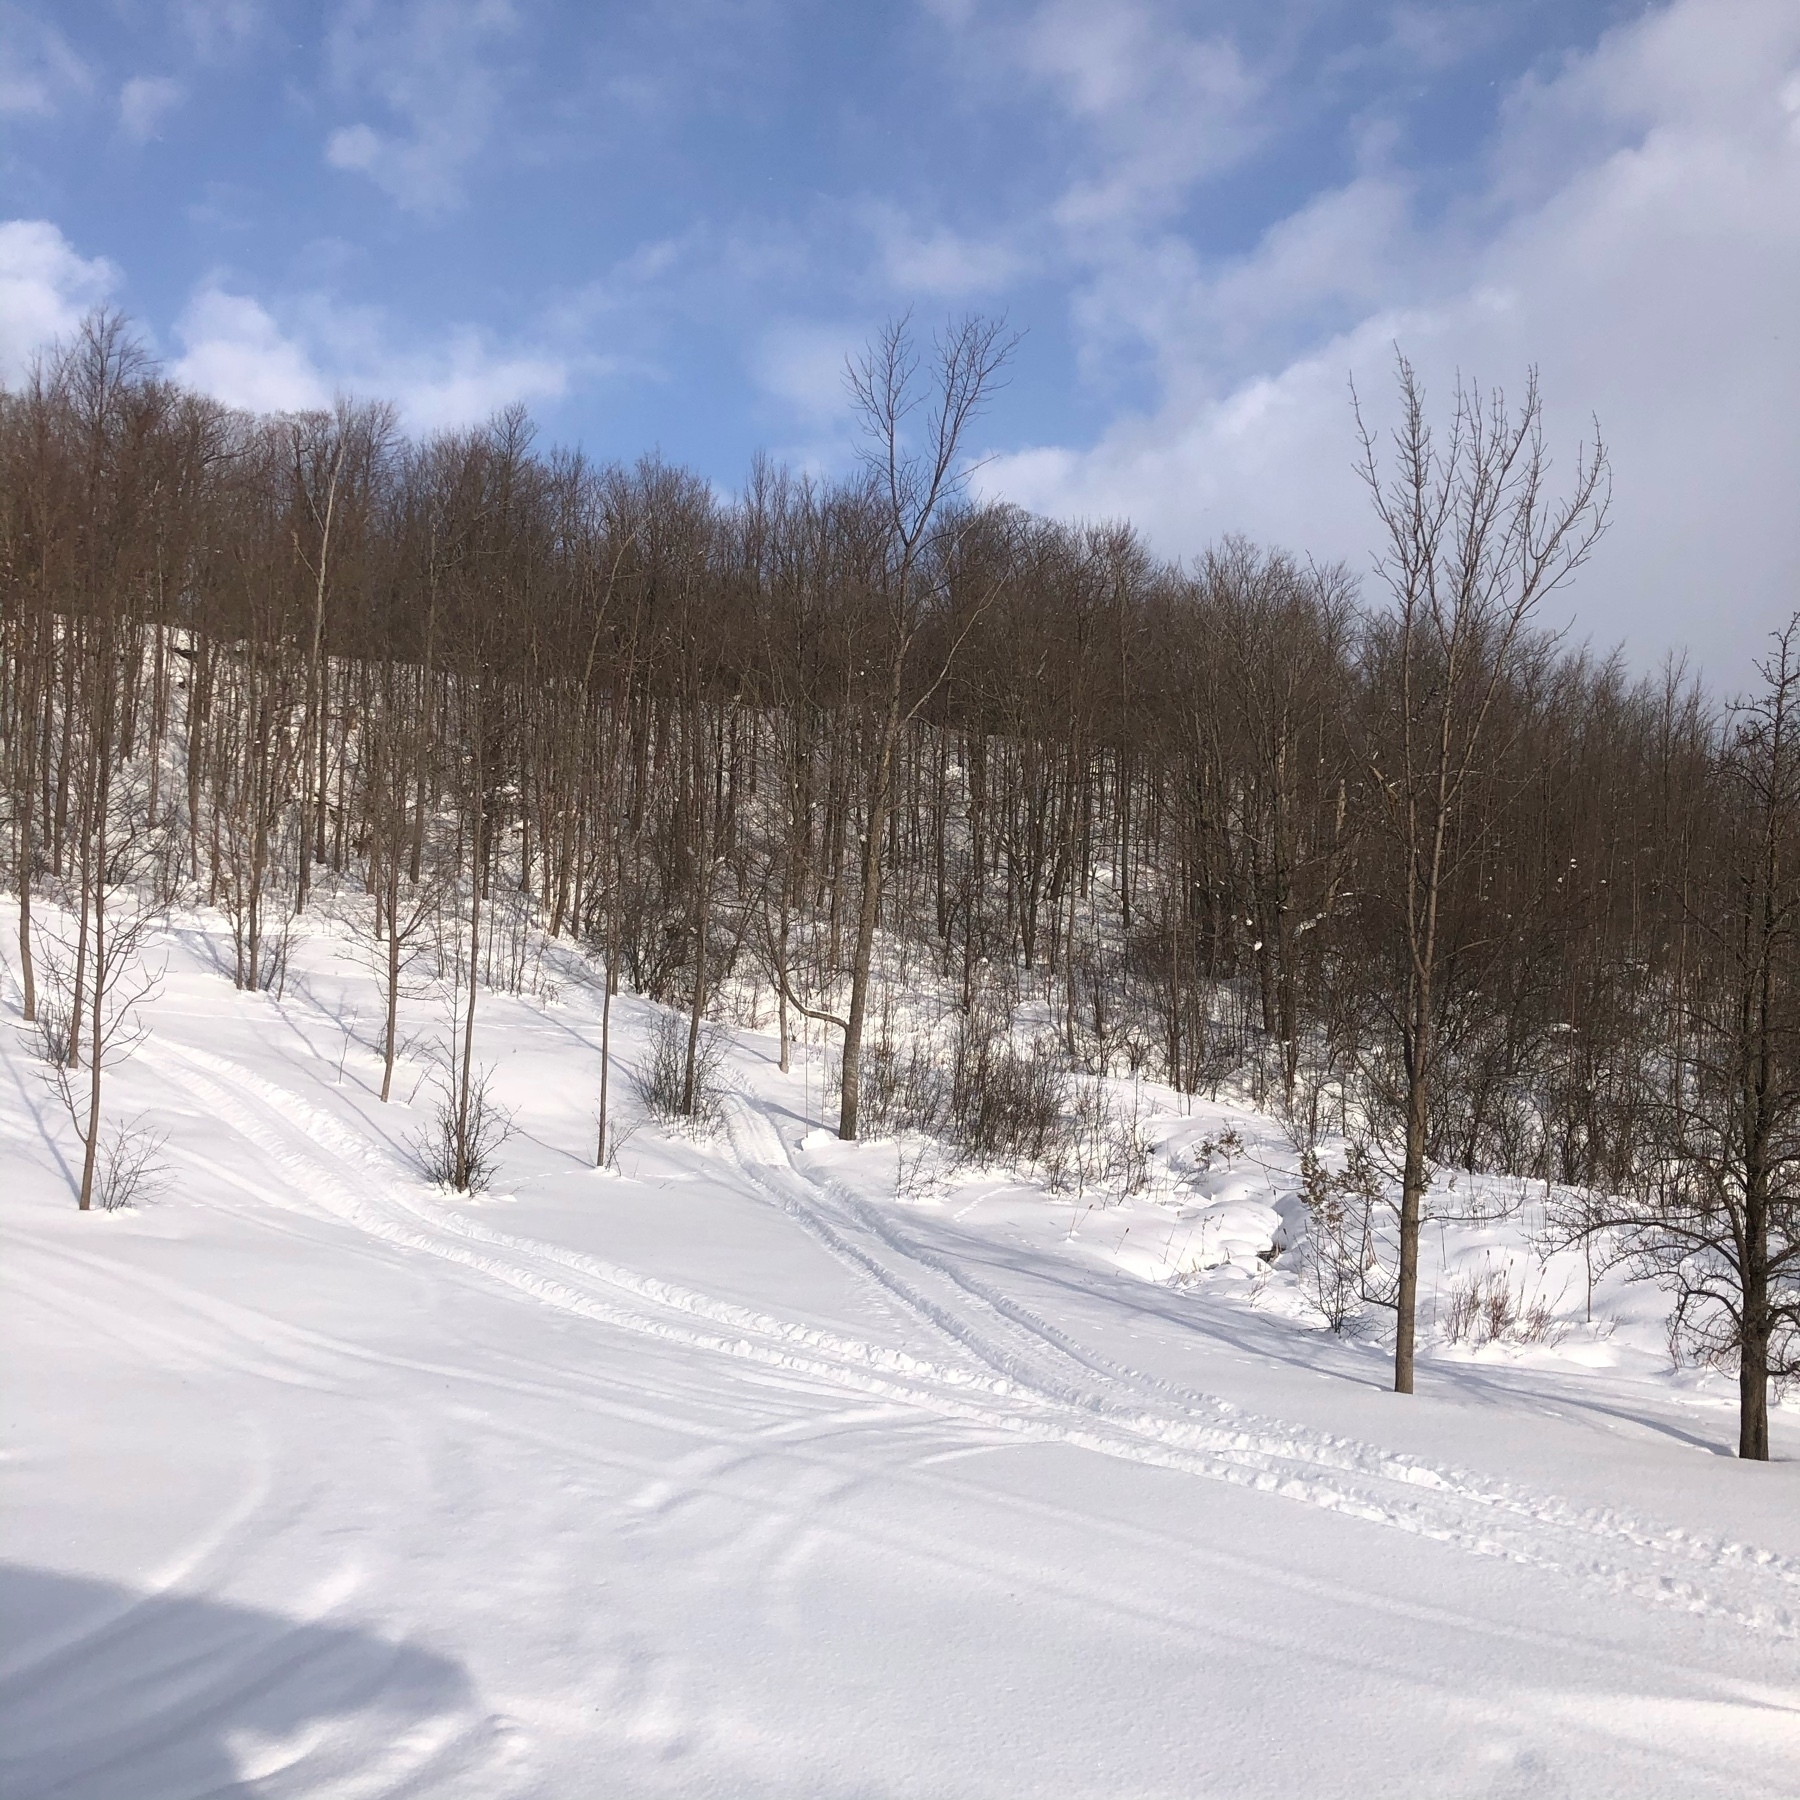 sky is a mixture of blue and clouds. there is a hill covered in part with trees and the rest is open and covered with snow. there is shadow of part of a house